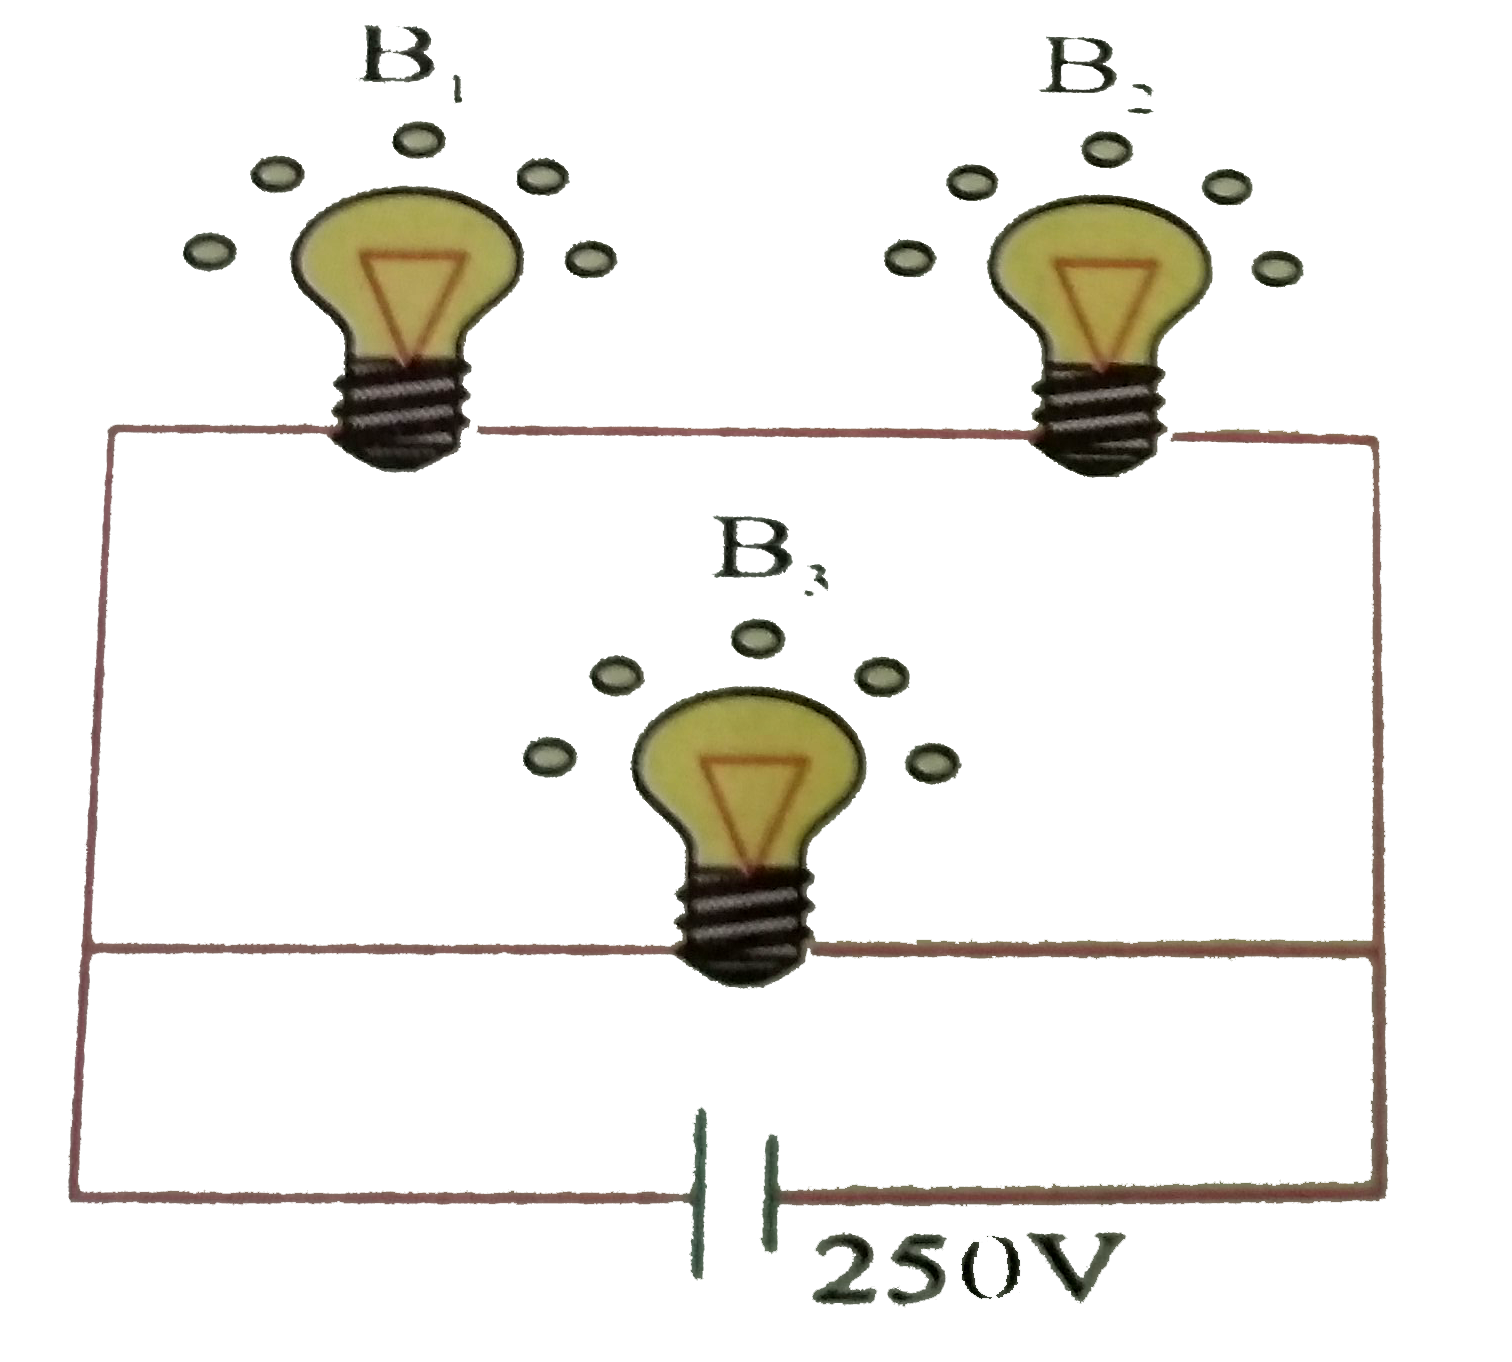 A 100 W bulb B(1) and two 60 W bulbs B(2) and B(3), are connected to a 250V source, as shown in the figure now W(1),W(2) and W(3) are the output powers of the bulbs B(1),B(2) and B(3) respectively then